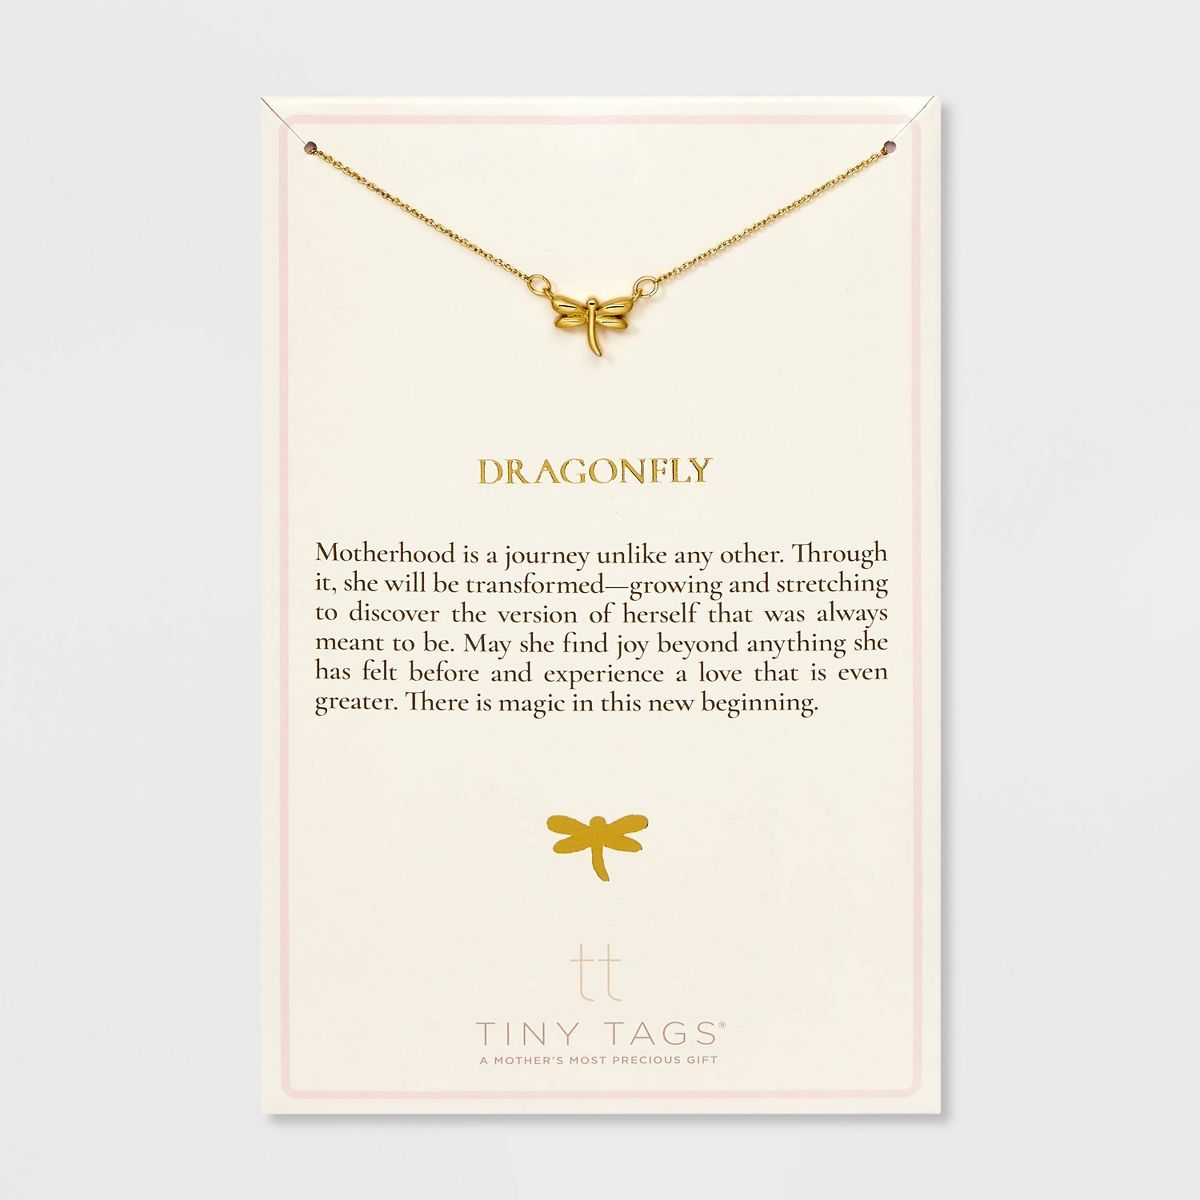 Tiny Tags 14K Gold Ion Plated Dragonfly Chain Necklace - Gold | Target